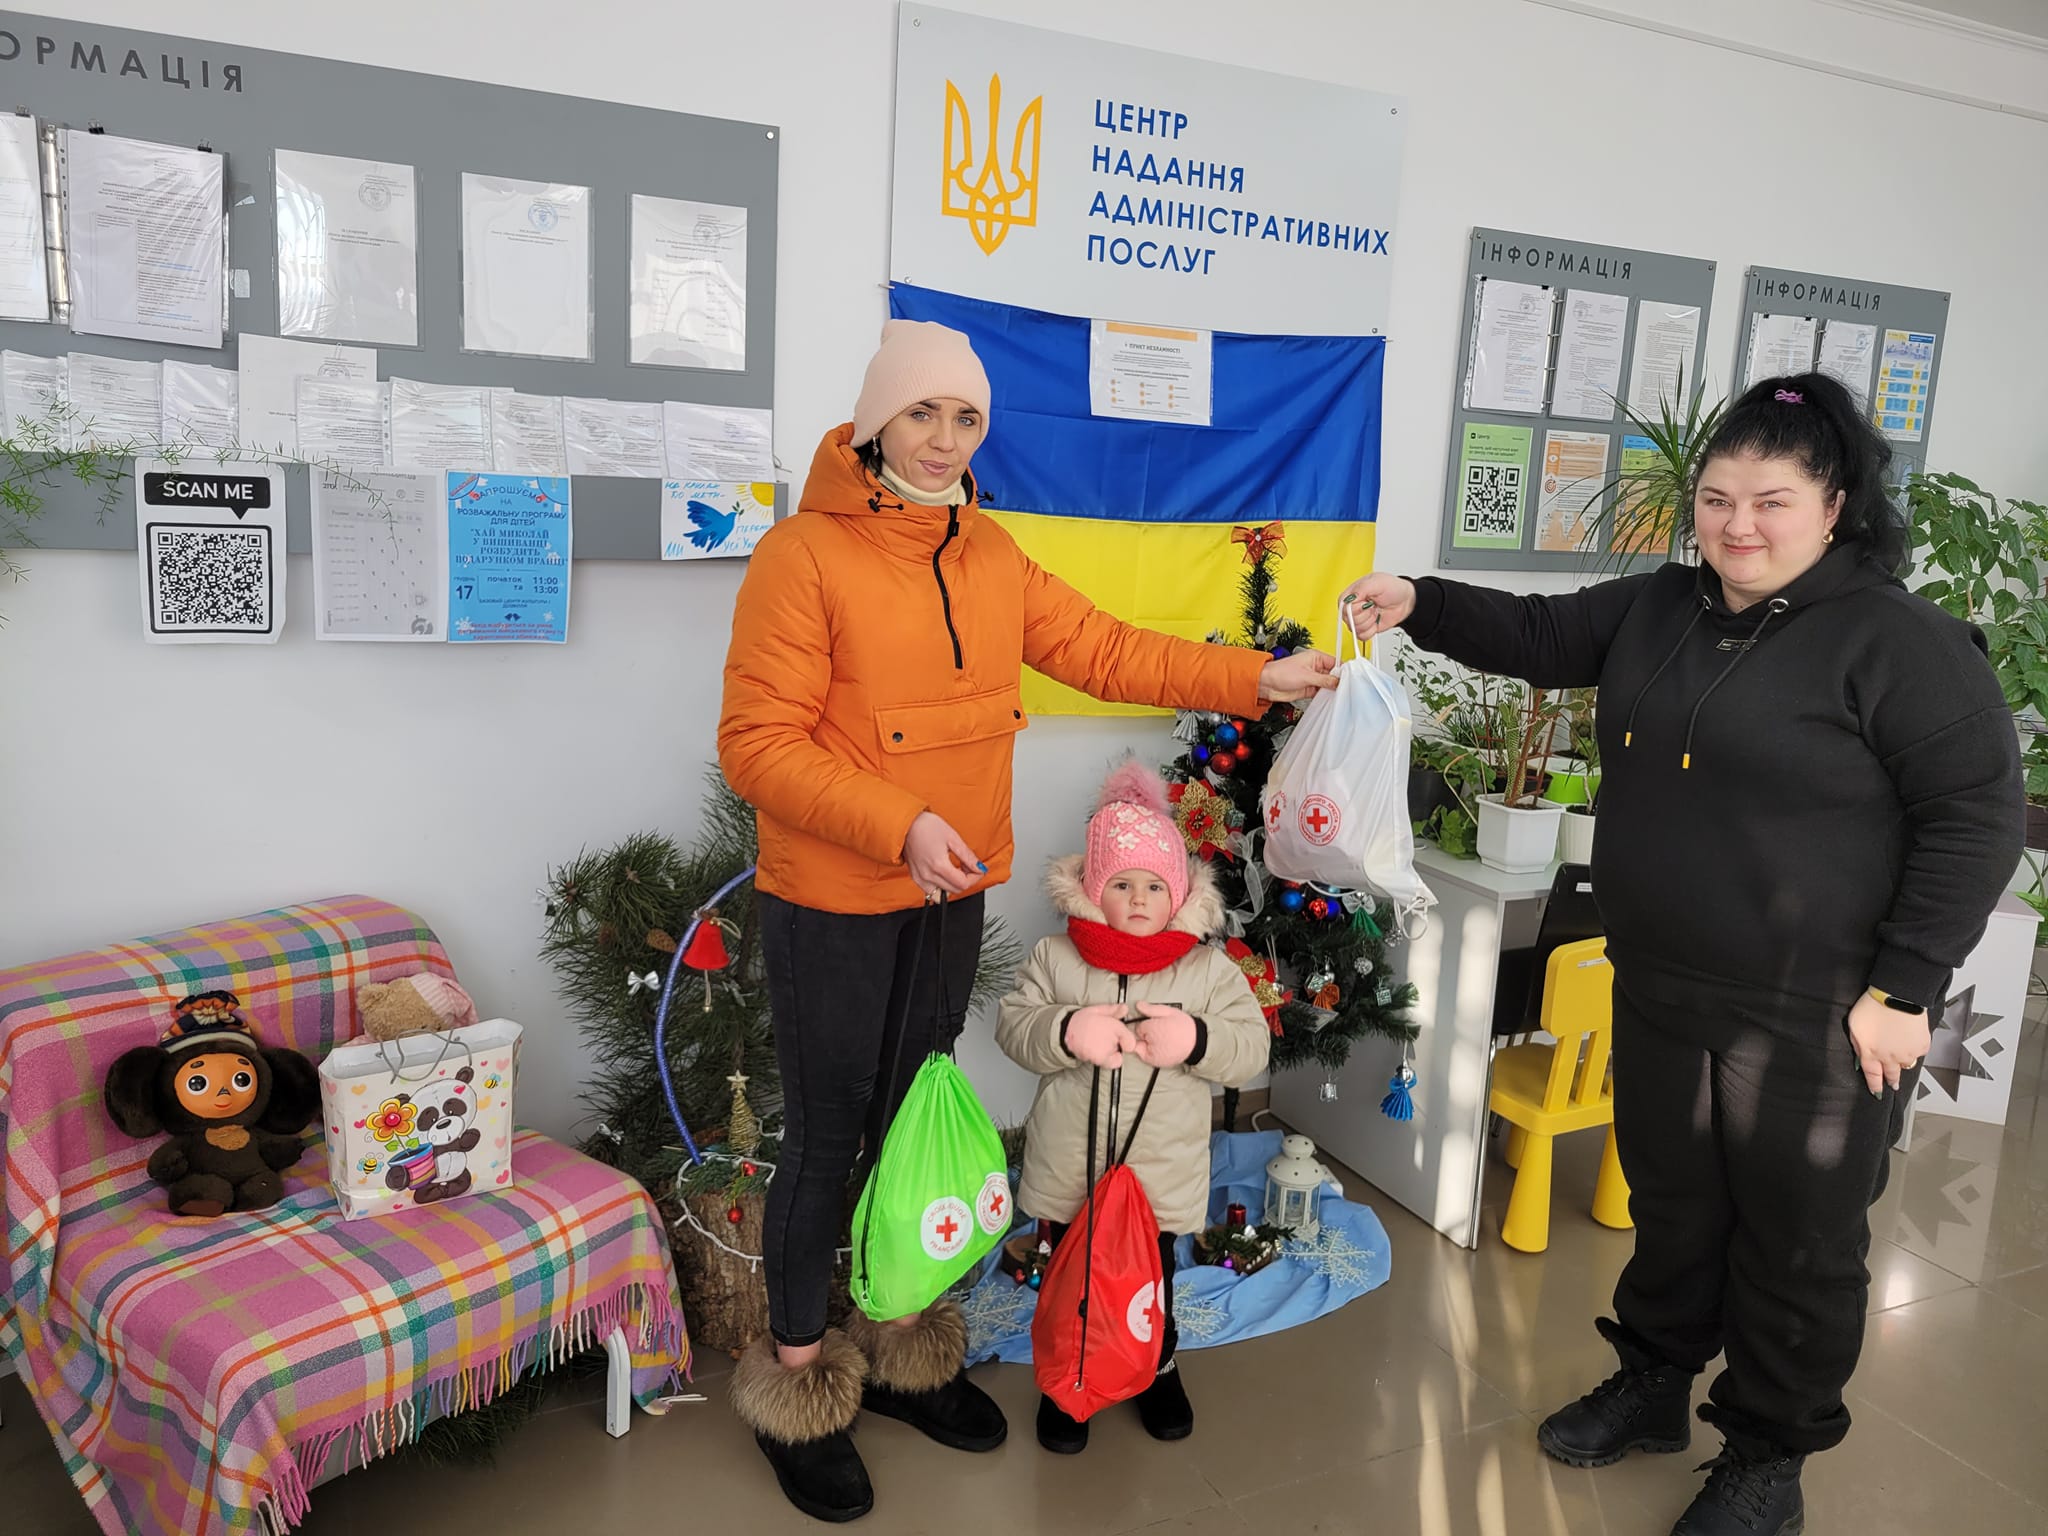 Aid to refugees from the Red Cross Society of Ukraine